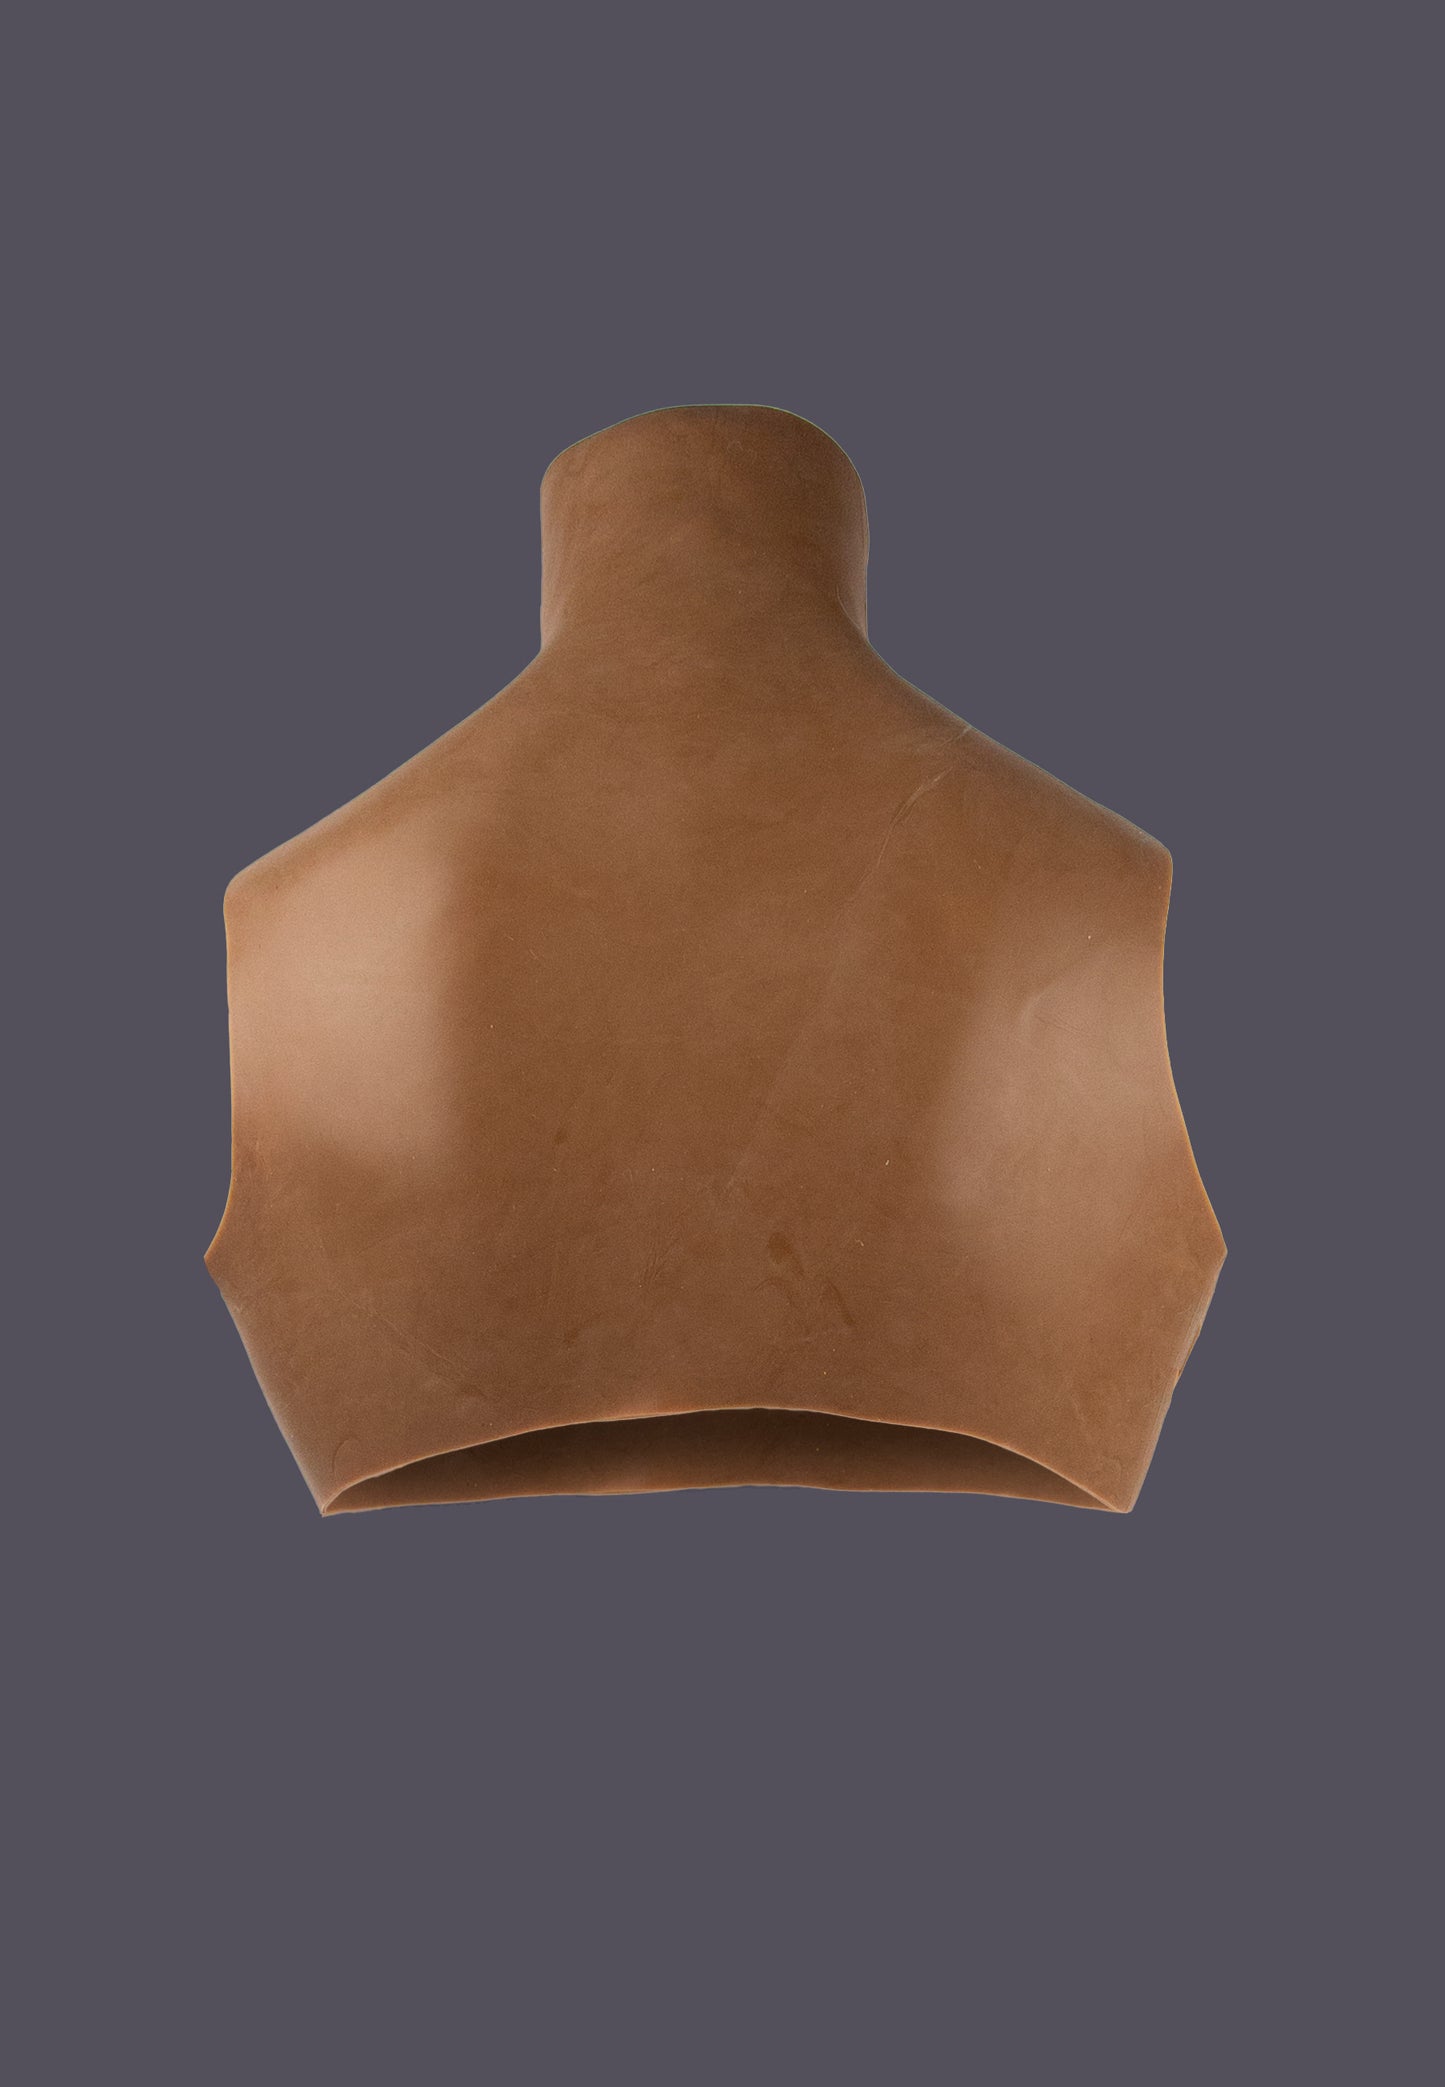 The back of the Silicone Torso chocolate